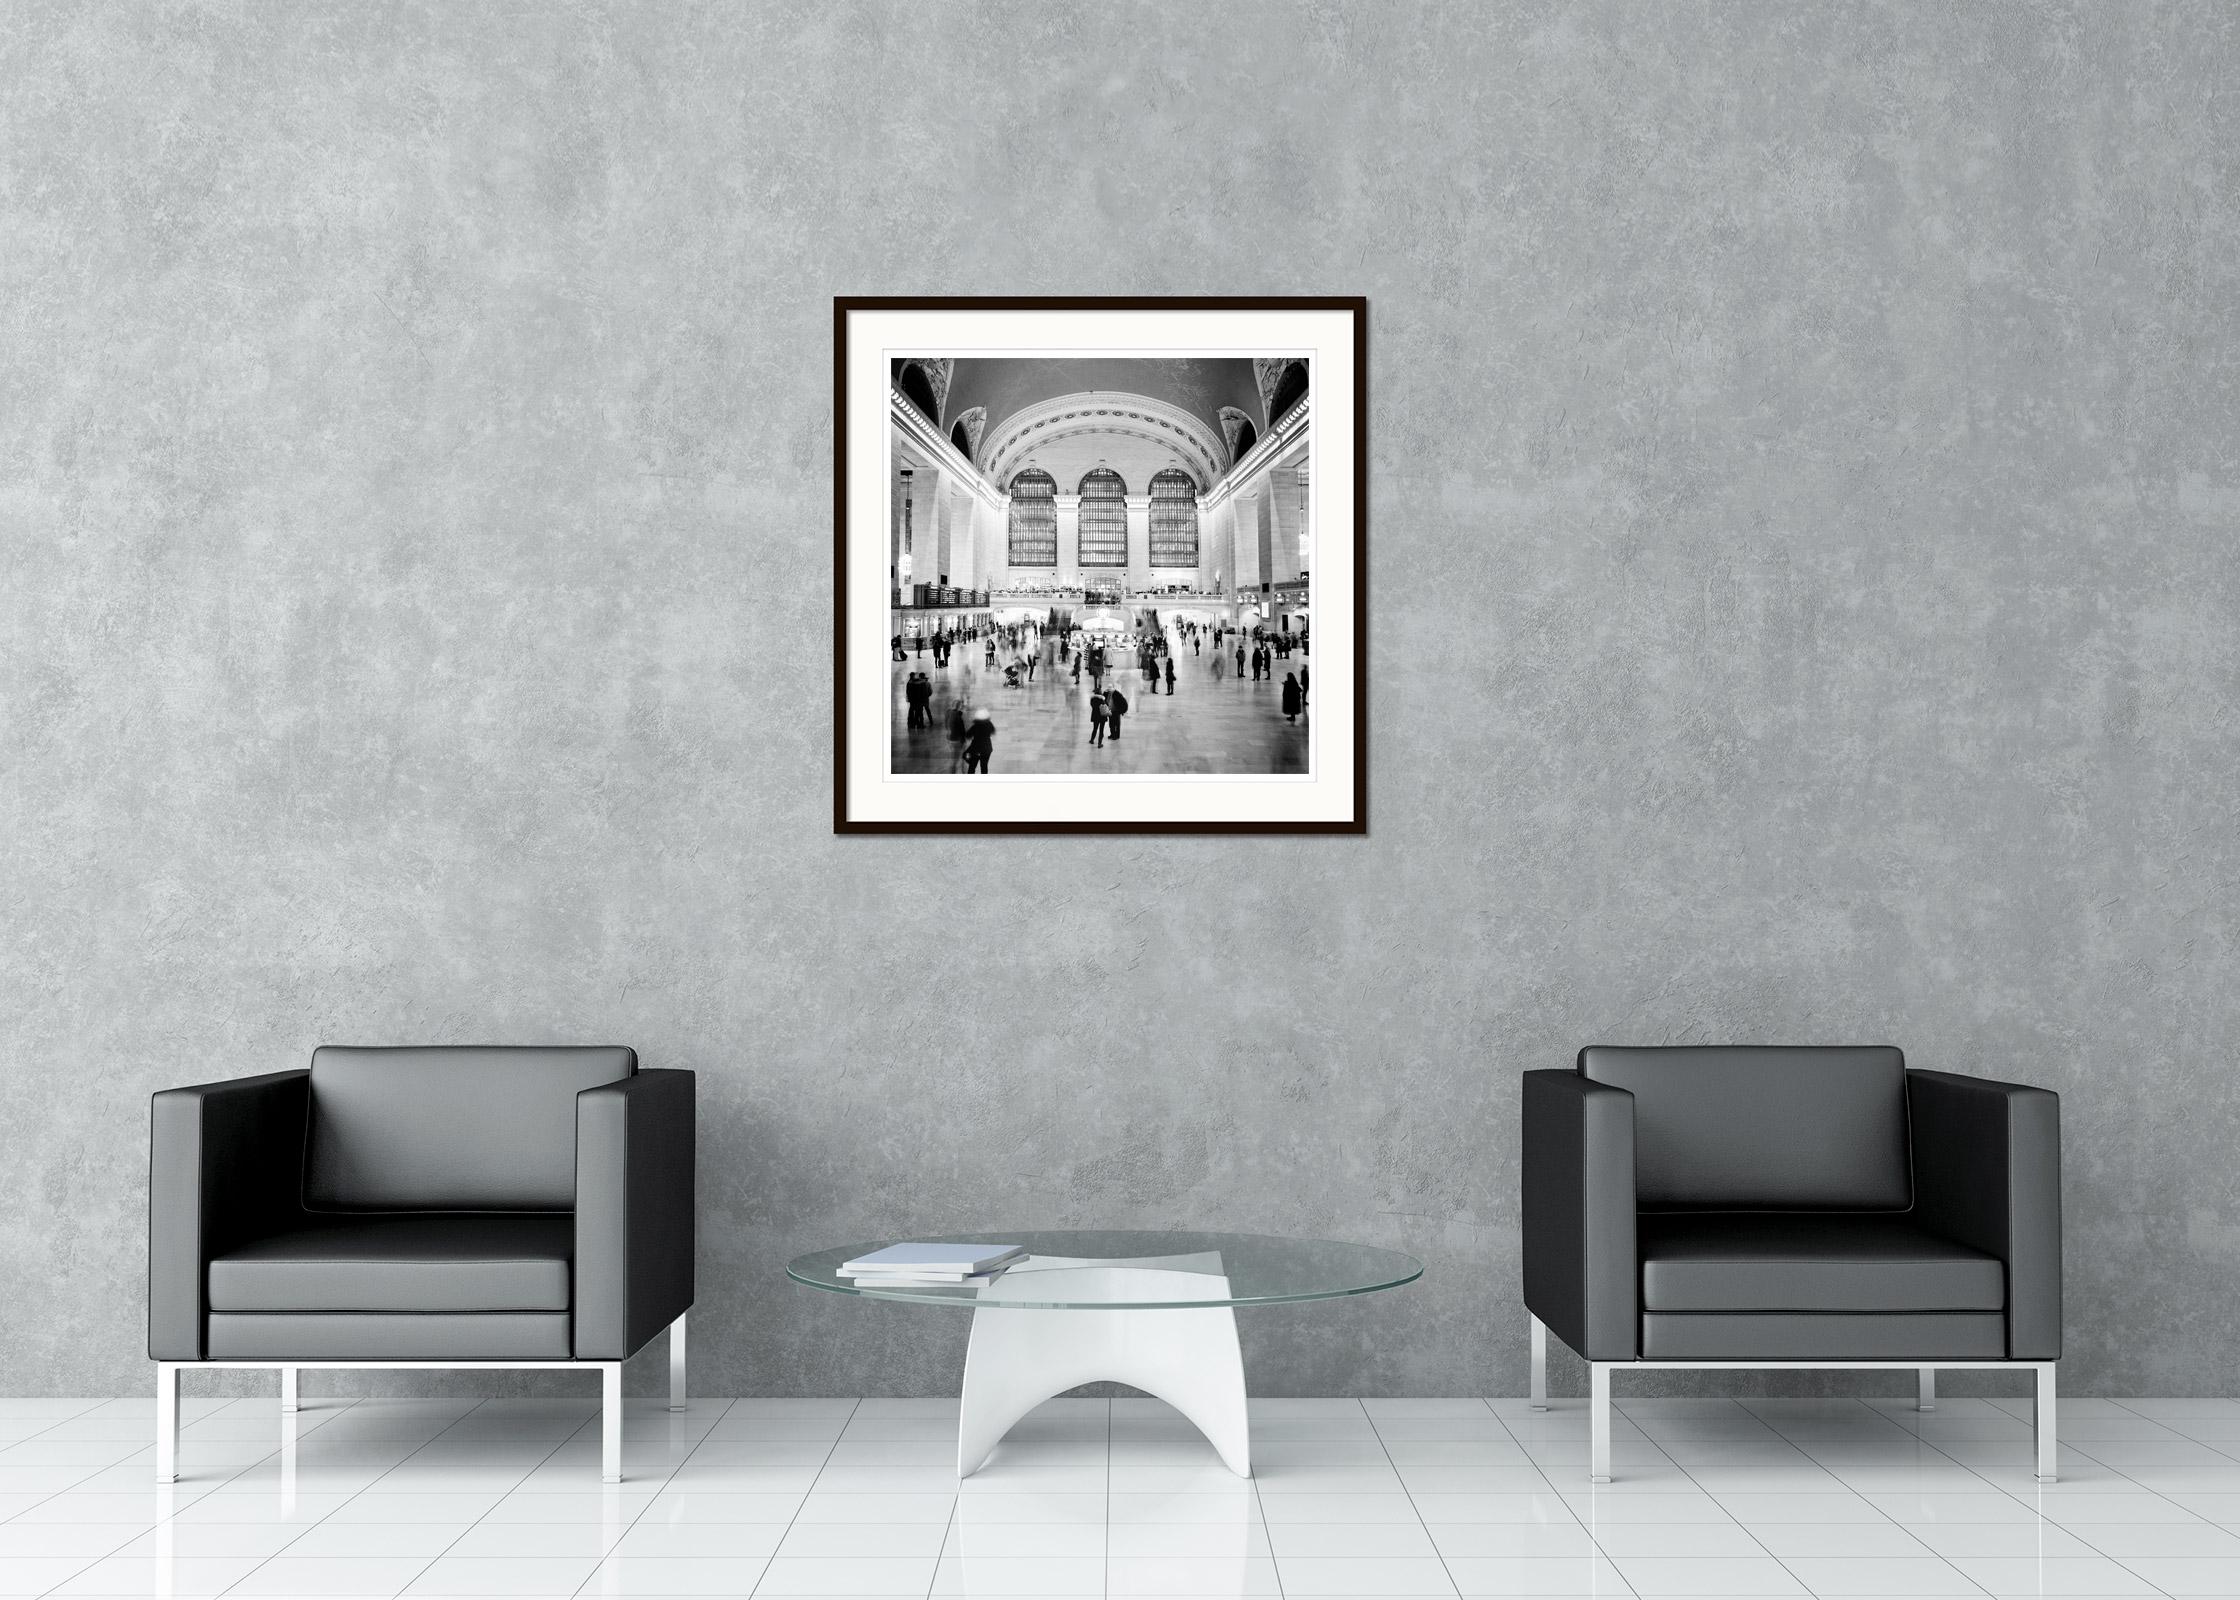 Black and white fine art cityscape photography. Archival pigment ink print, edition of 7. Signed, titled, dated and numbered by artist. Certificate of authenticity included. Printed with 4cm white border.
International award winner photographer